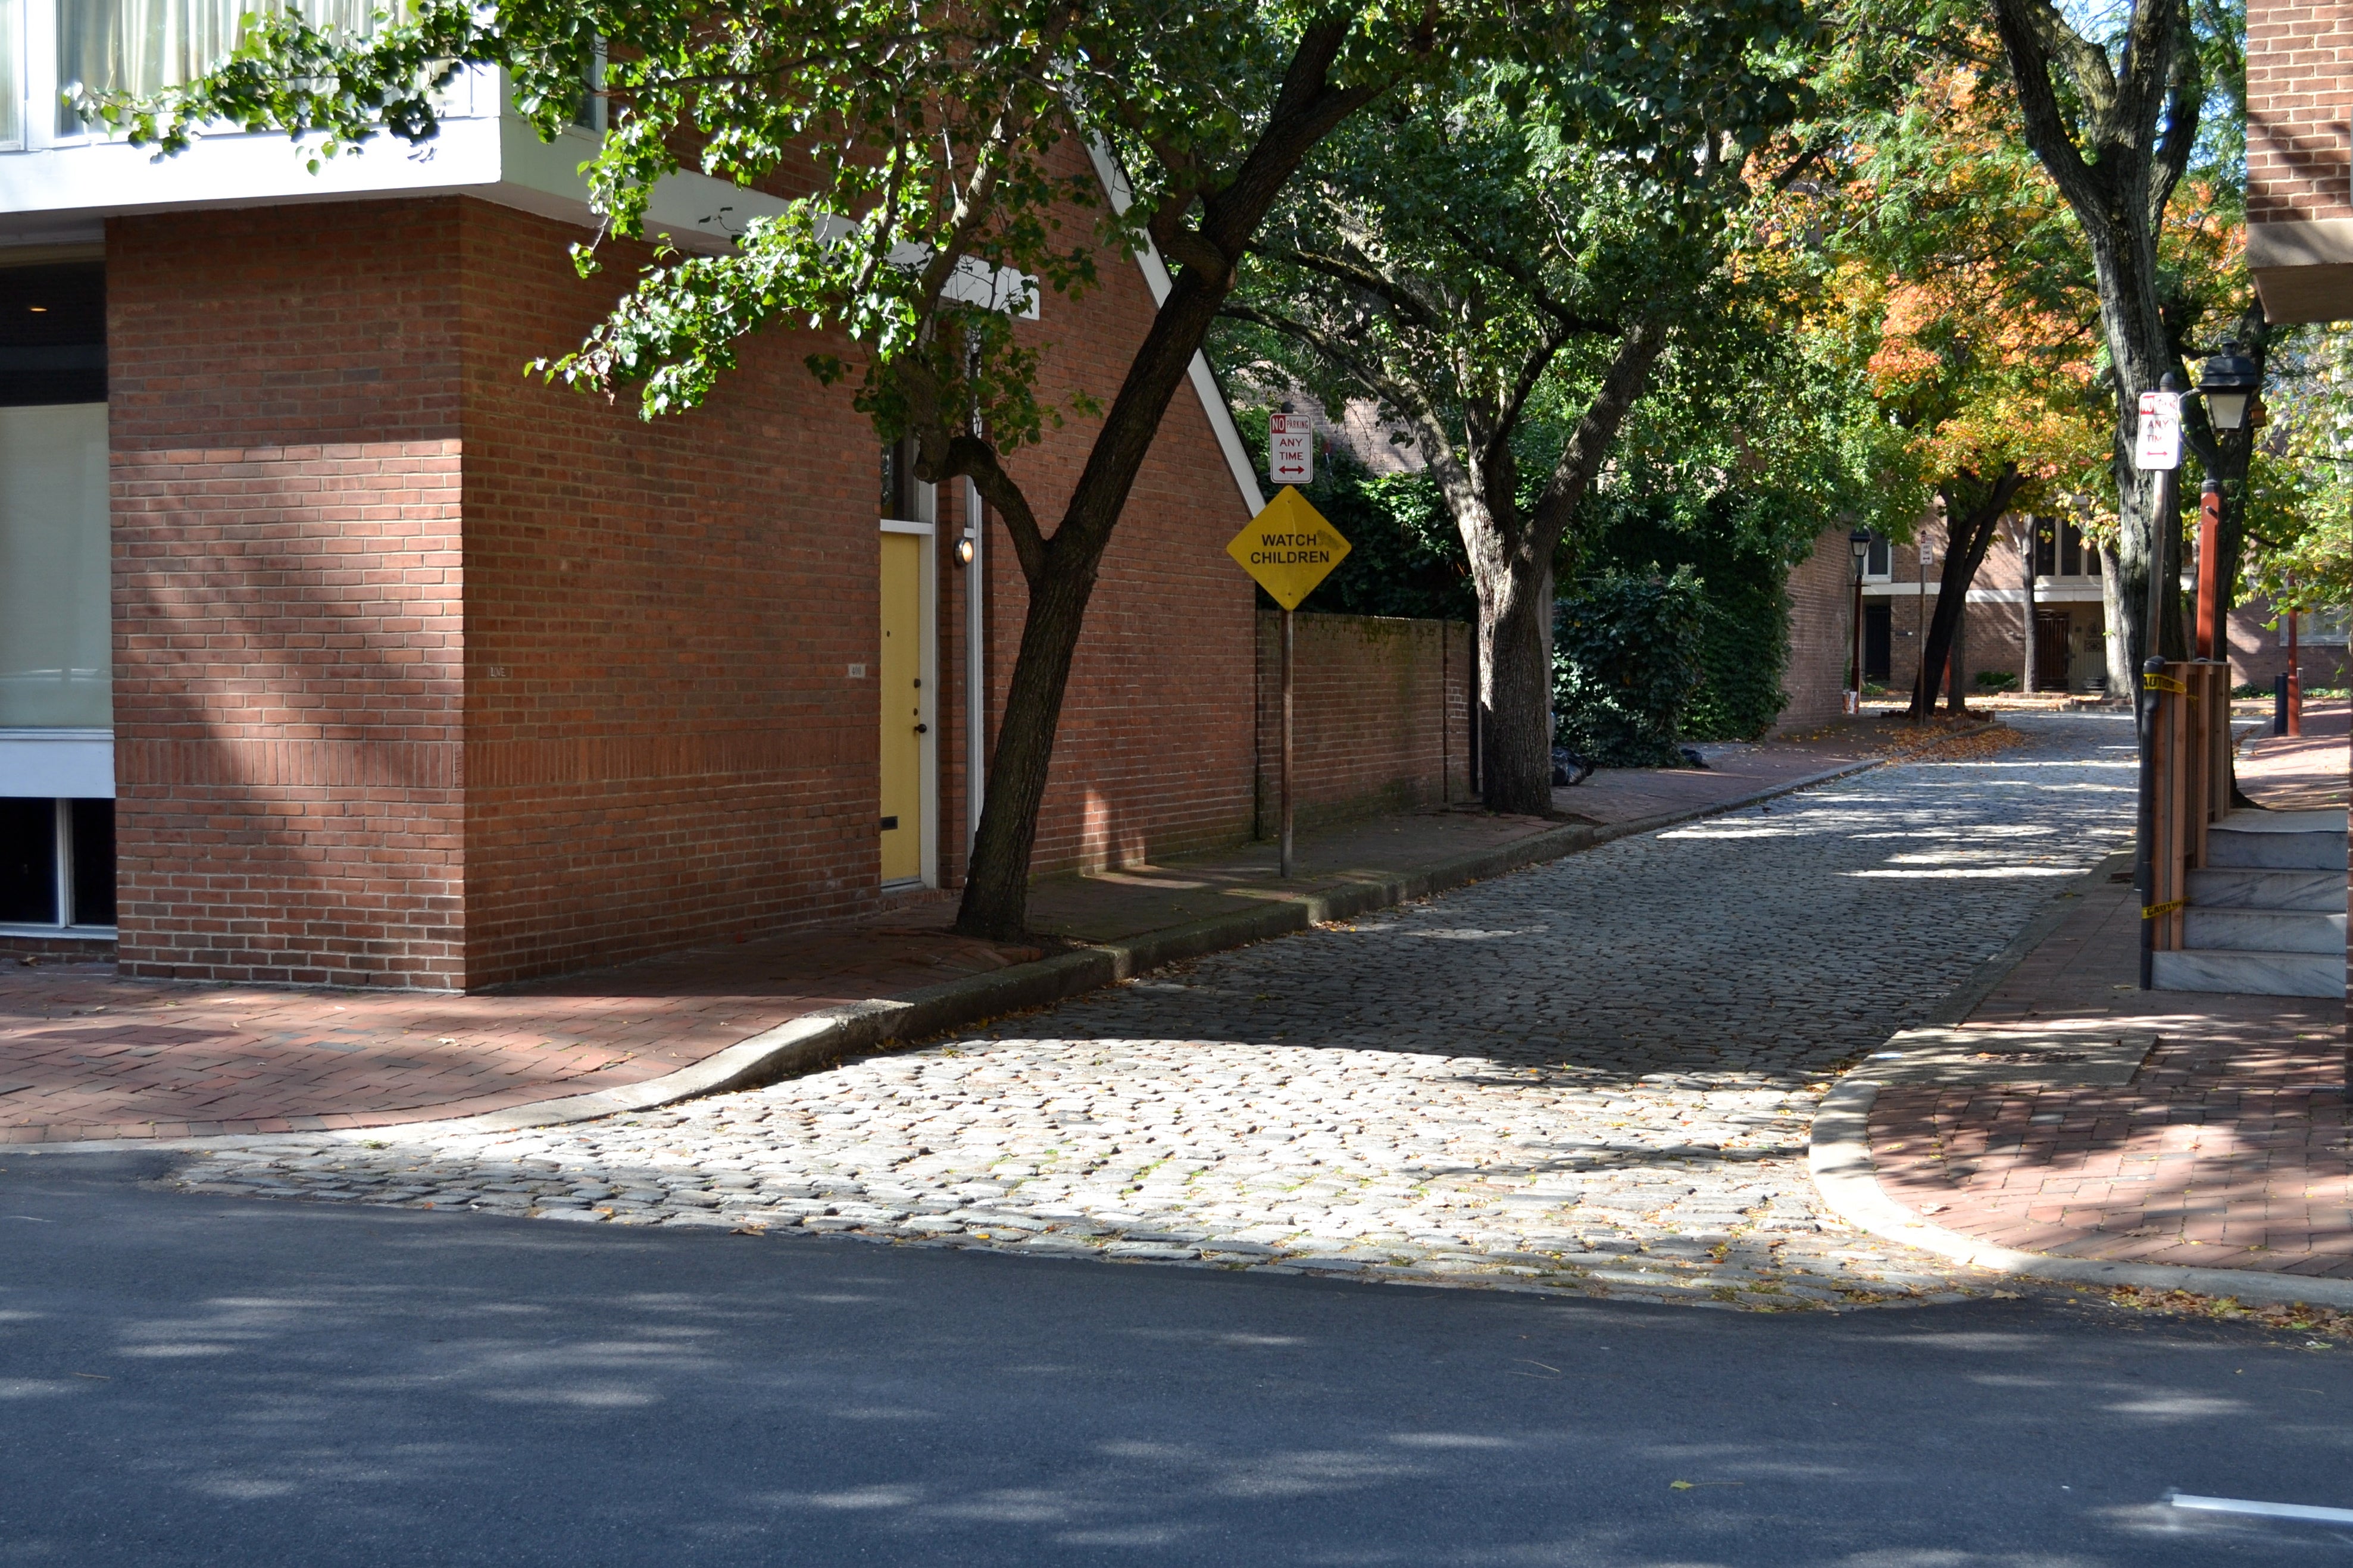 Corners of cobble stone streets are an exception to the ADA ramp requirements because cobble stone is not considered ADA accessible